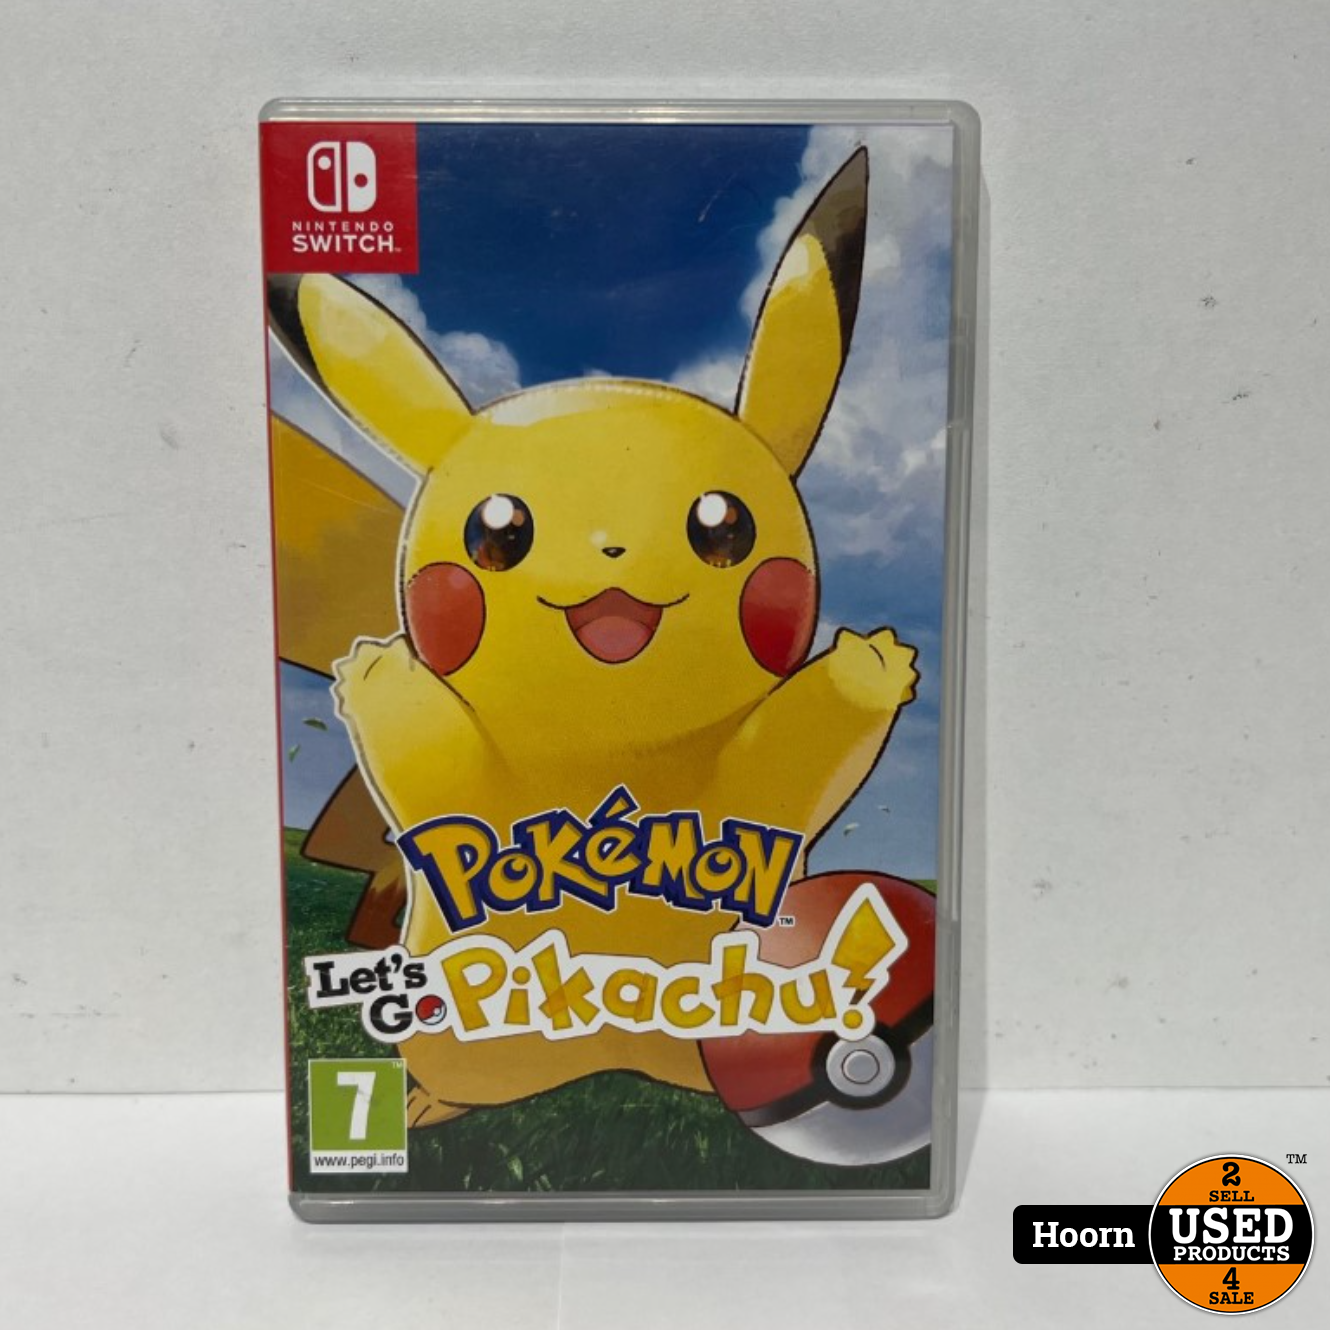 Demon Play Beweging tempo Nintendo Switch Game: Pokemon Let's Go Pikachu - Used Products Hoorn